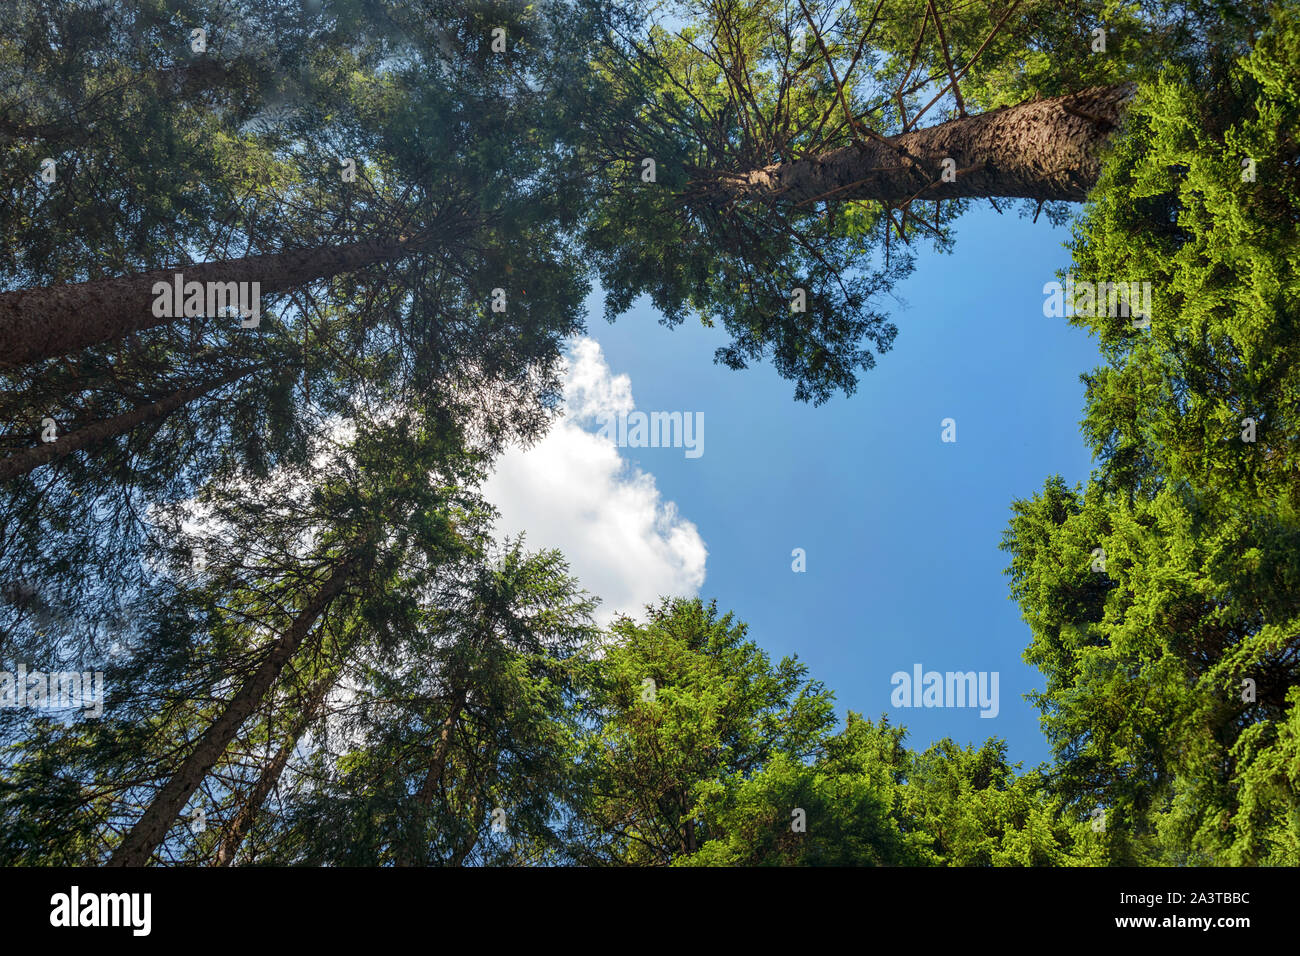 Heart shaped hole showing blue sky in the pine forest. Romantic or eco love symbol concept idea for abstract background with free artwork copy space Stock Photo